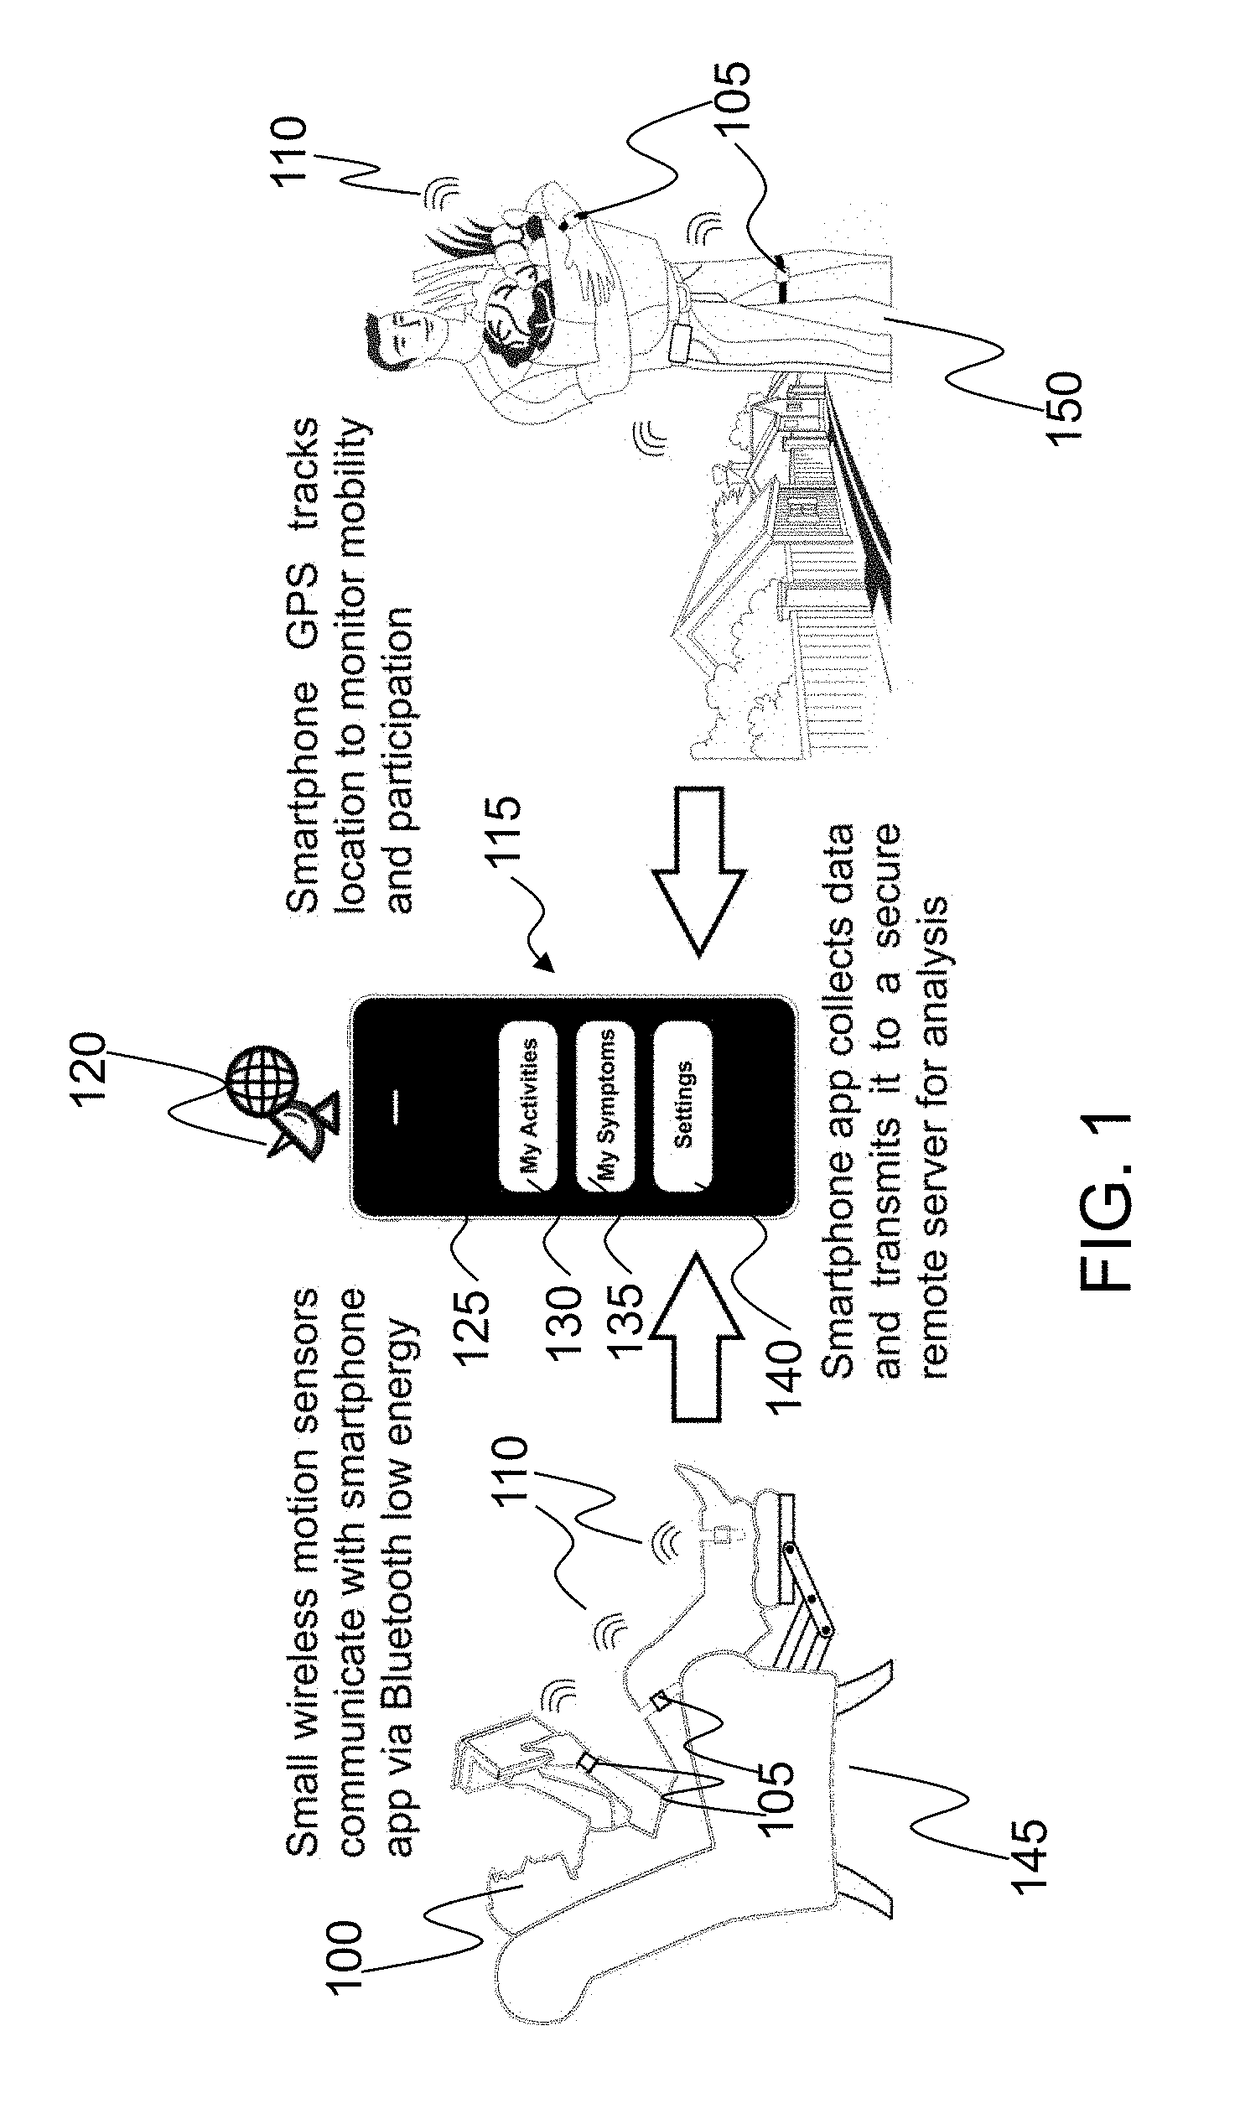 Pain quantification and management system and device, and method of using